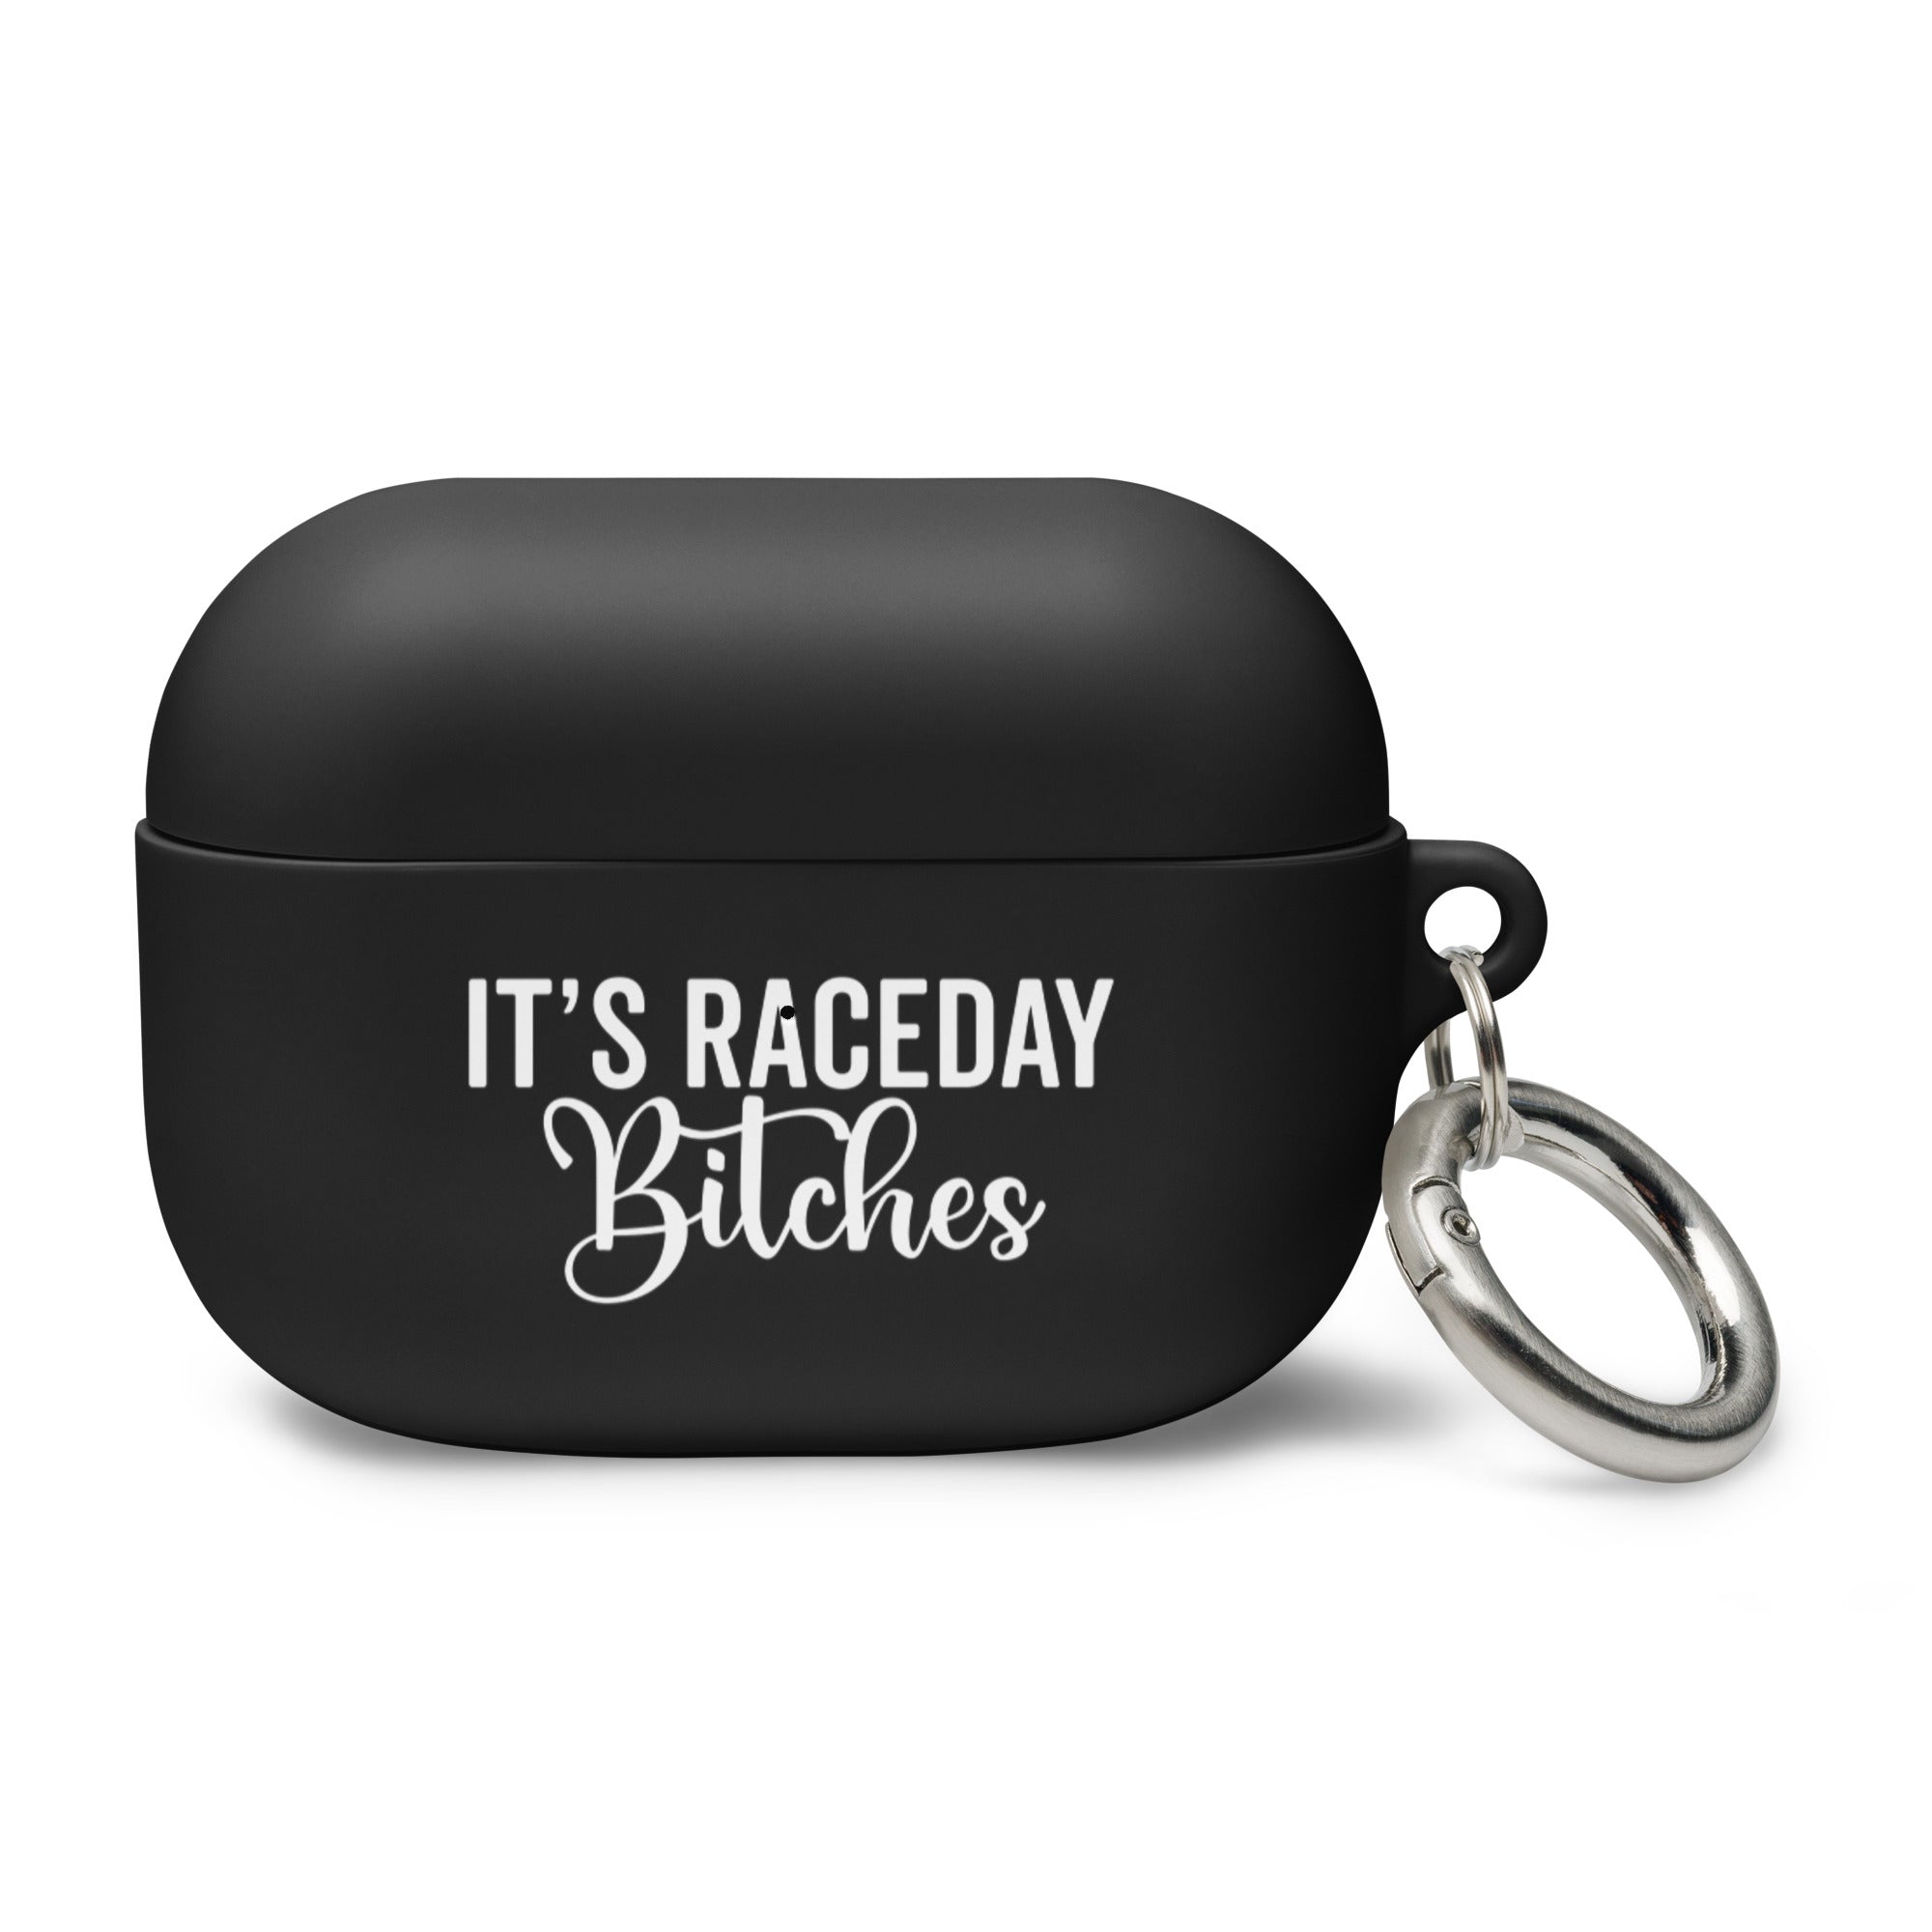 It’s Raceday Bitches AirPods case